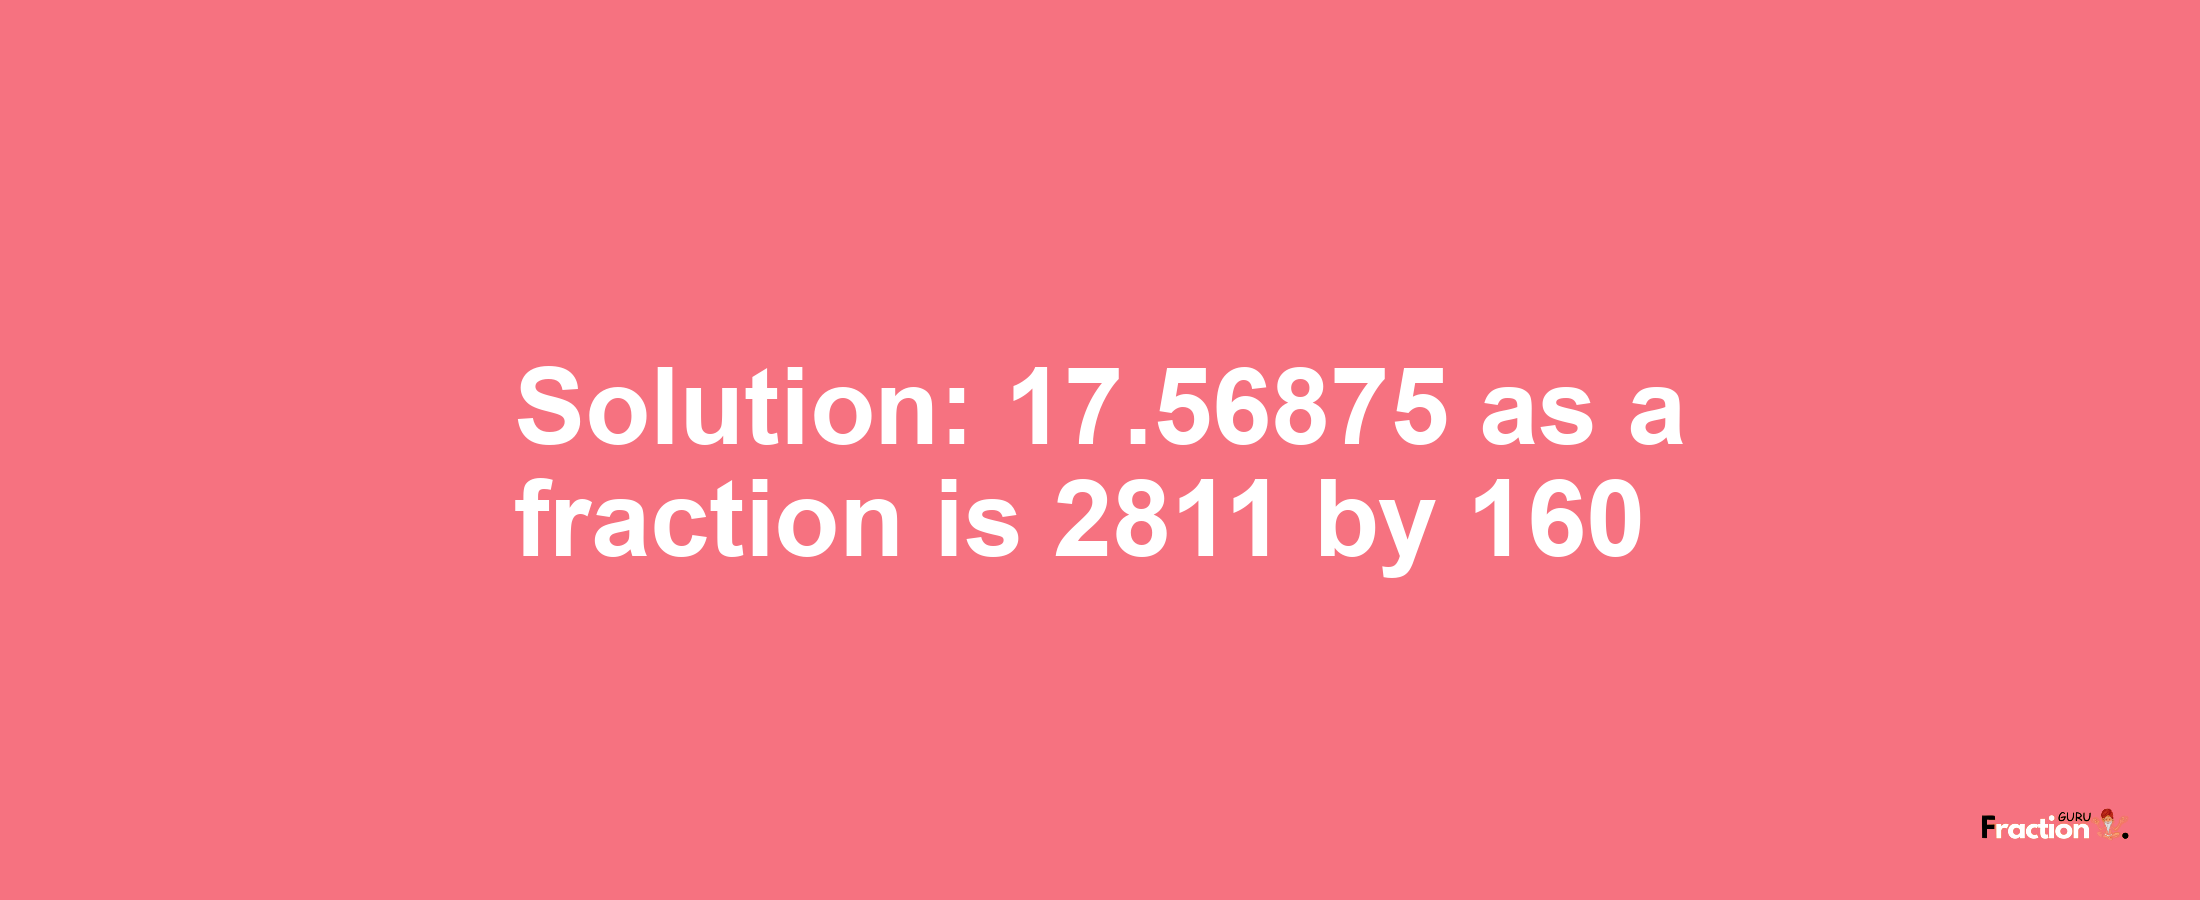 Solution:17.56875 as a fraction is 2811/160